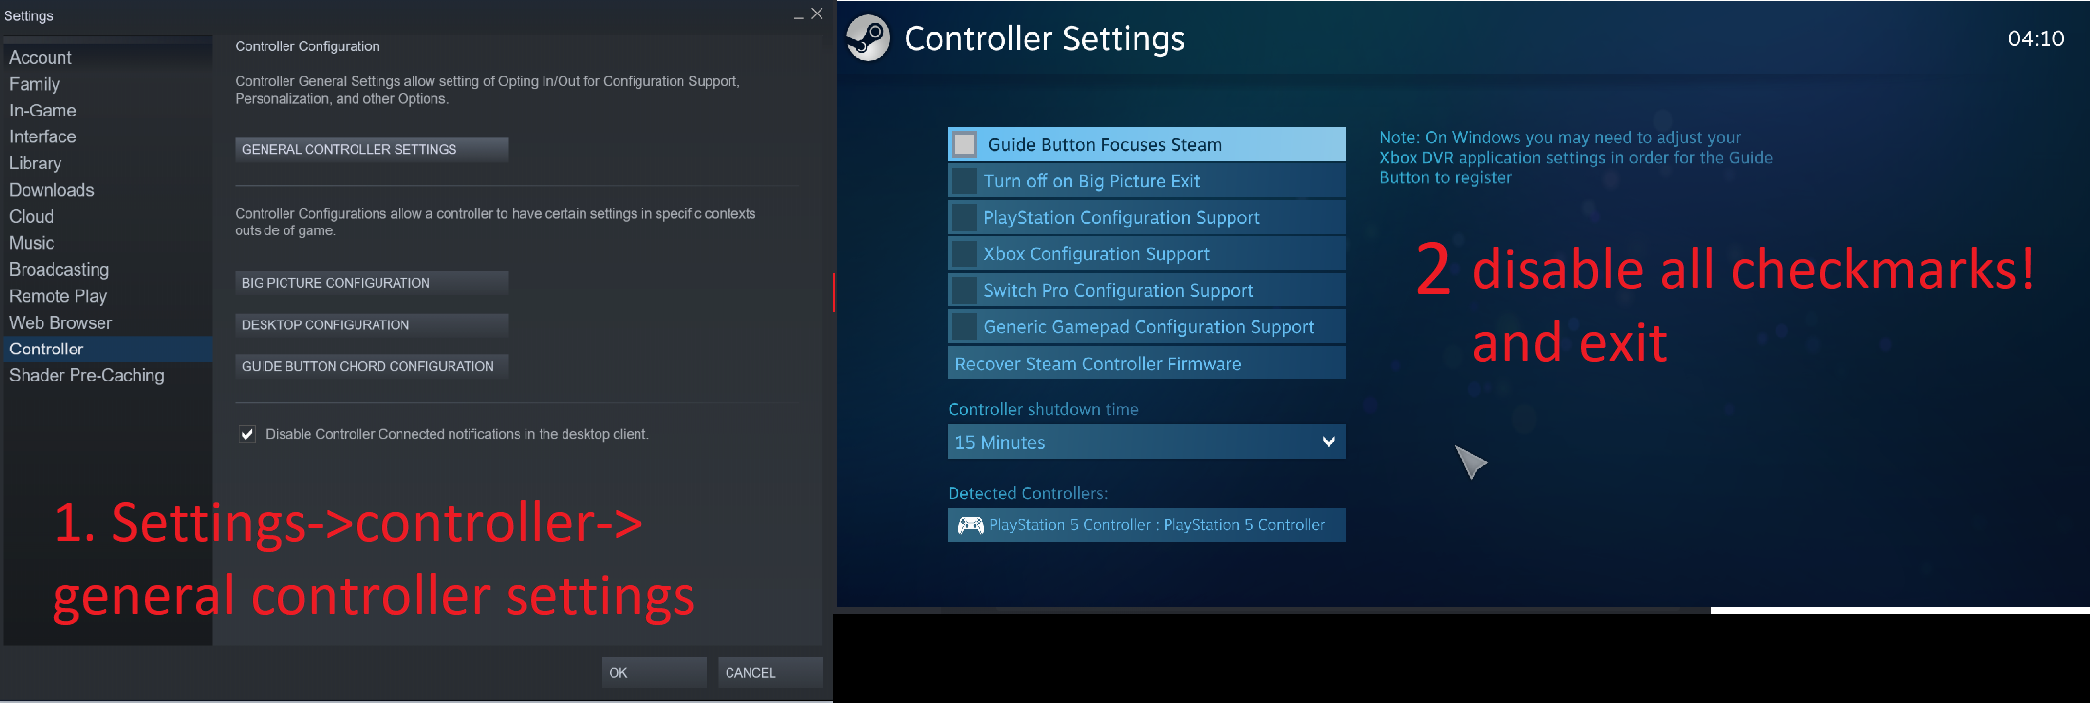 Rocket League Ultimate Guide: Reduce controller input-lag & Increase controller input-consistency